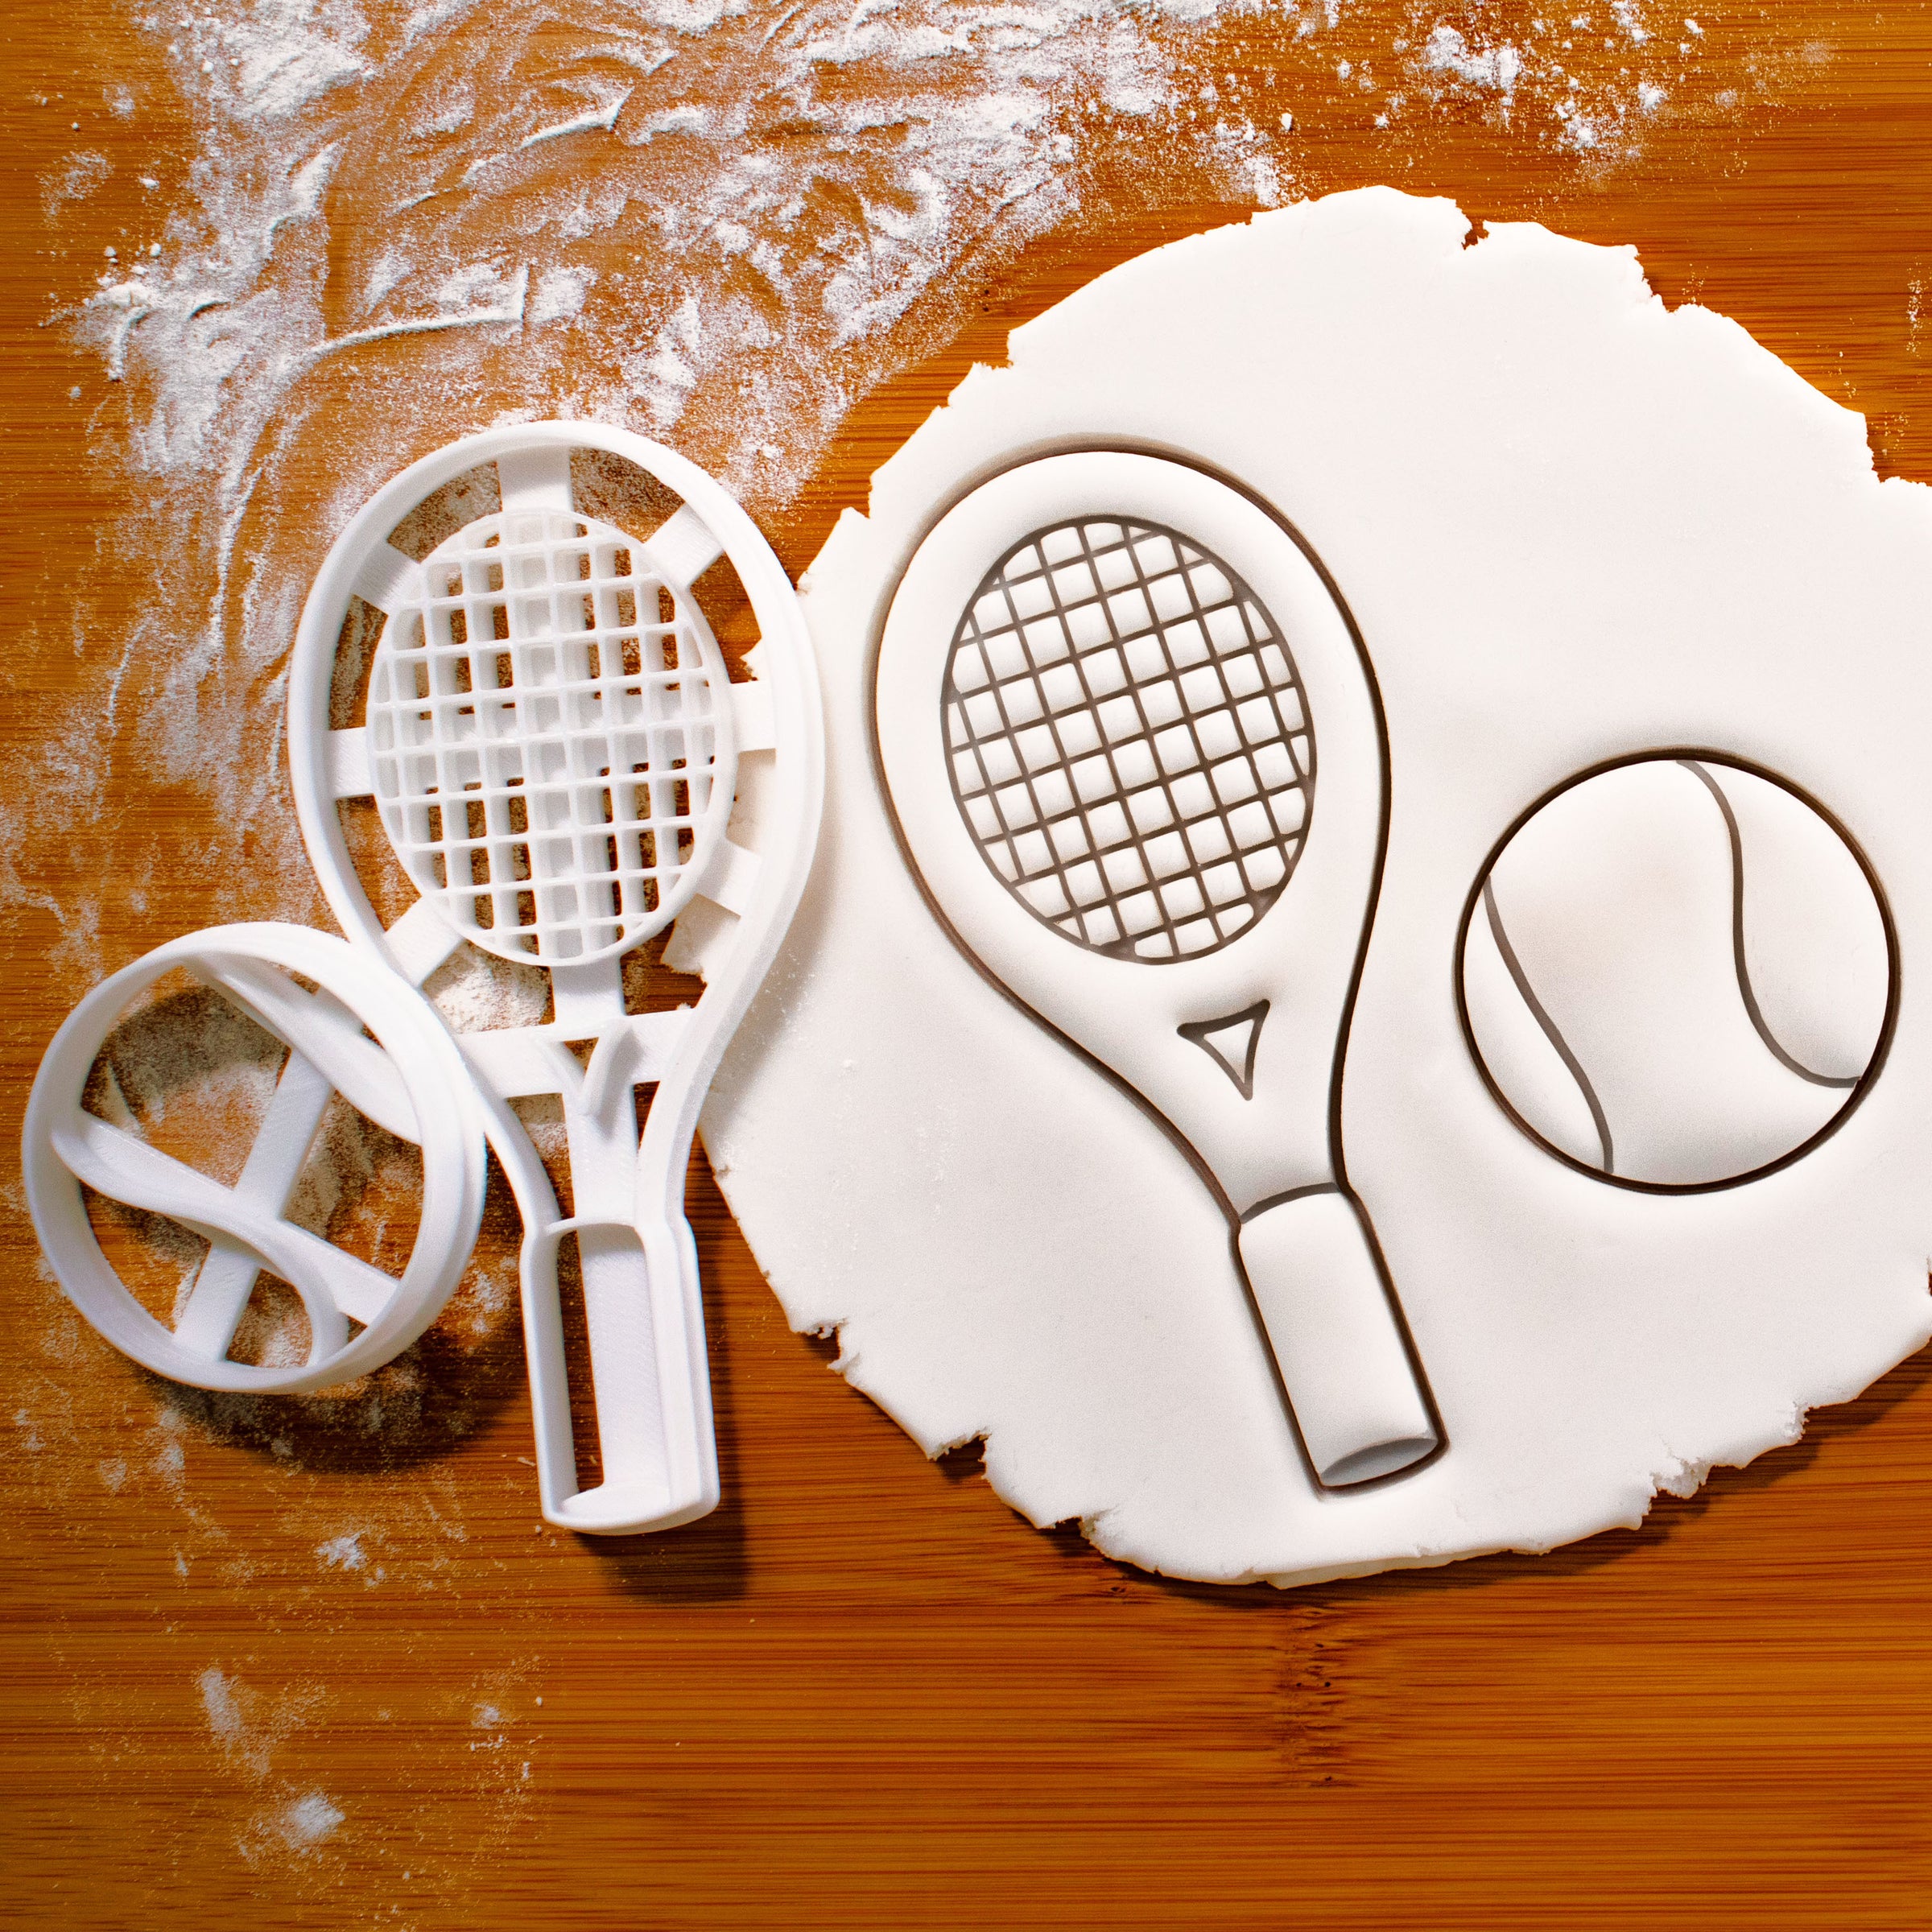 set of tennis racket and tennis ball cookie cutters pressed on fondant